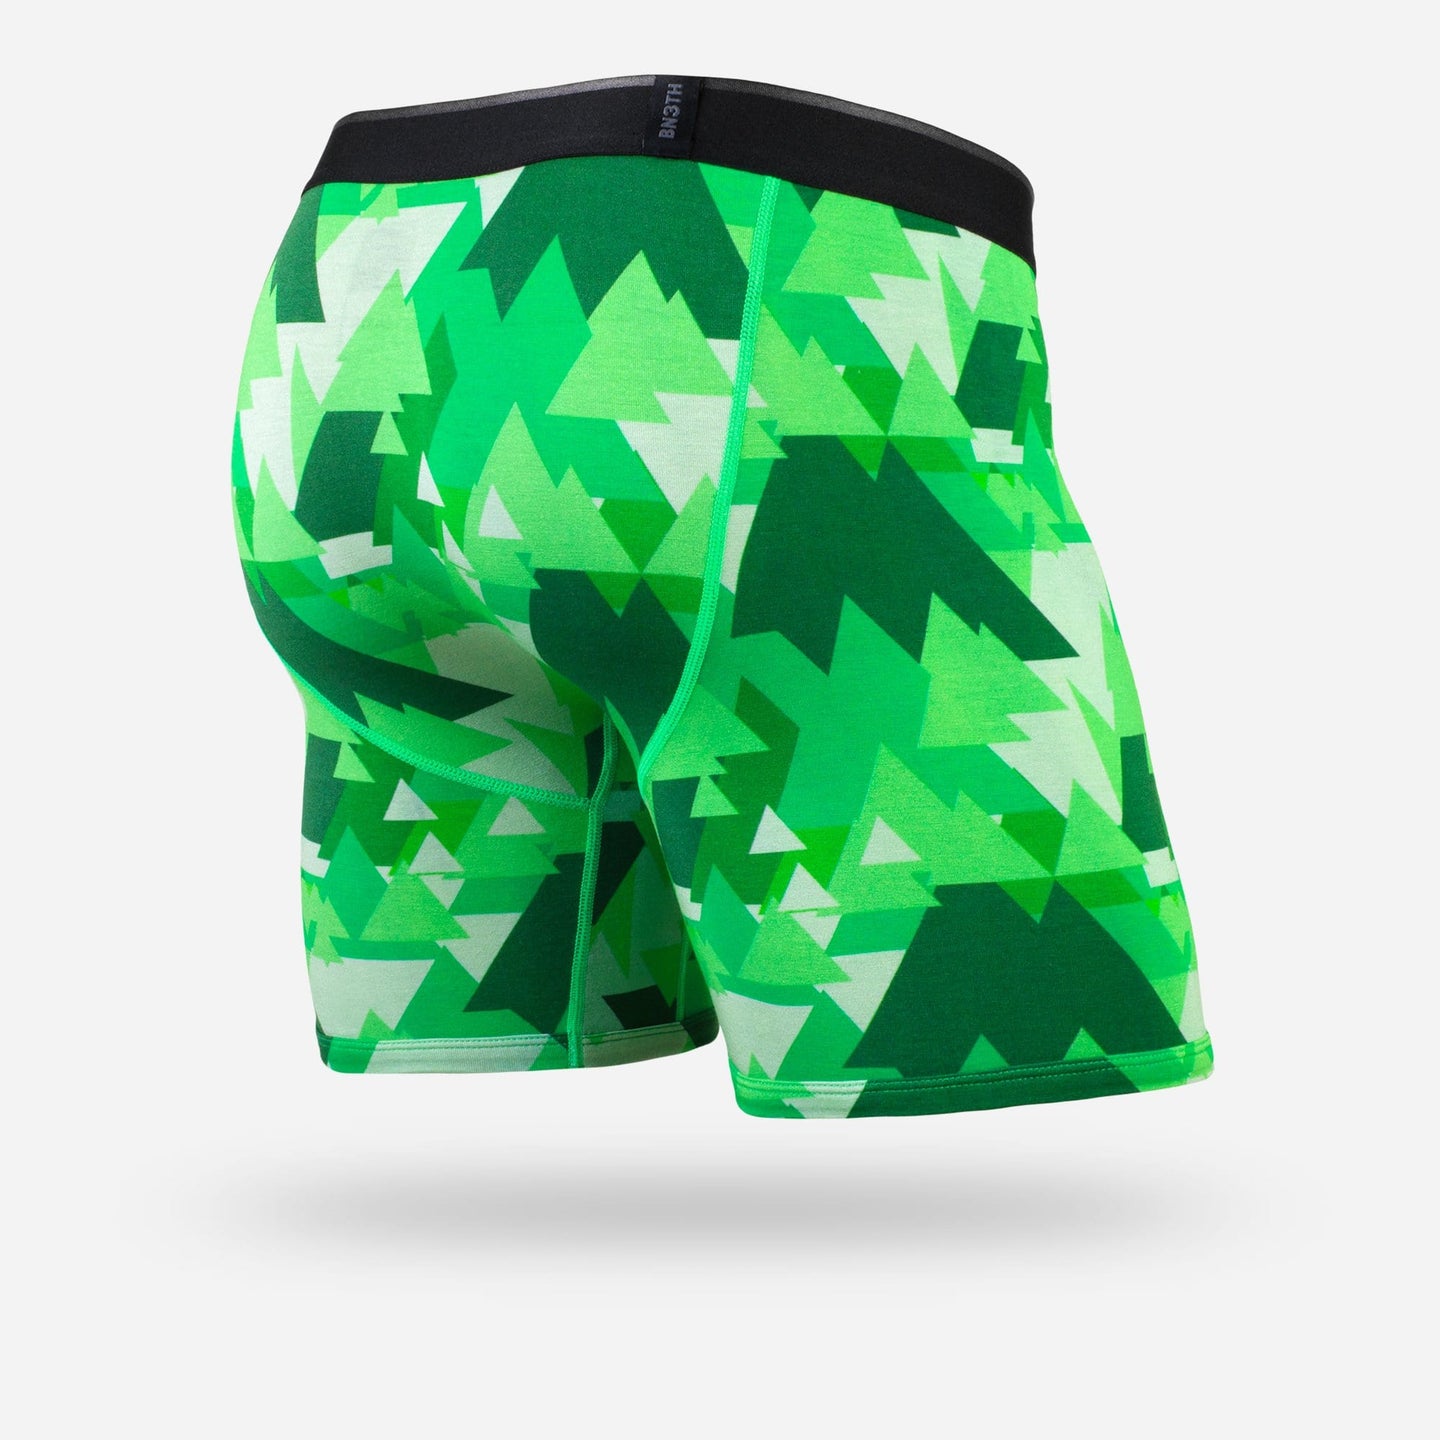 MENS CLASSIC BOXER BRIEF: GEOTREES GREEN